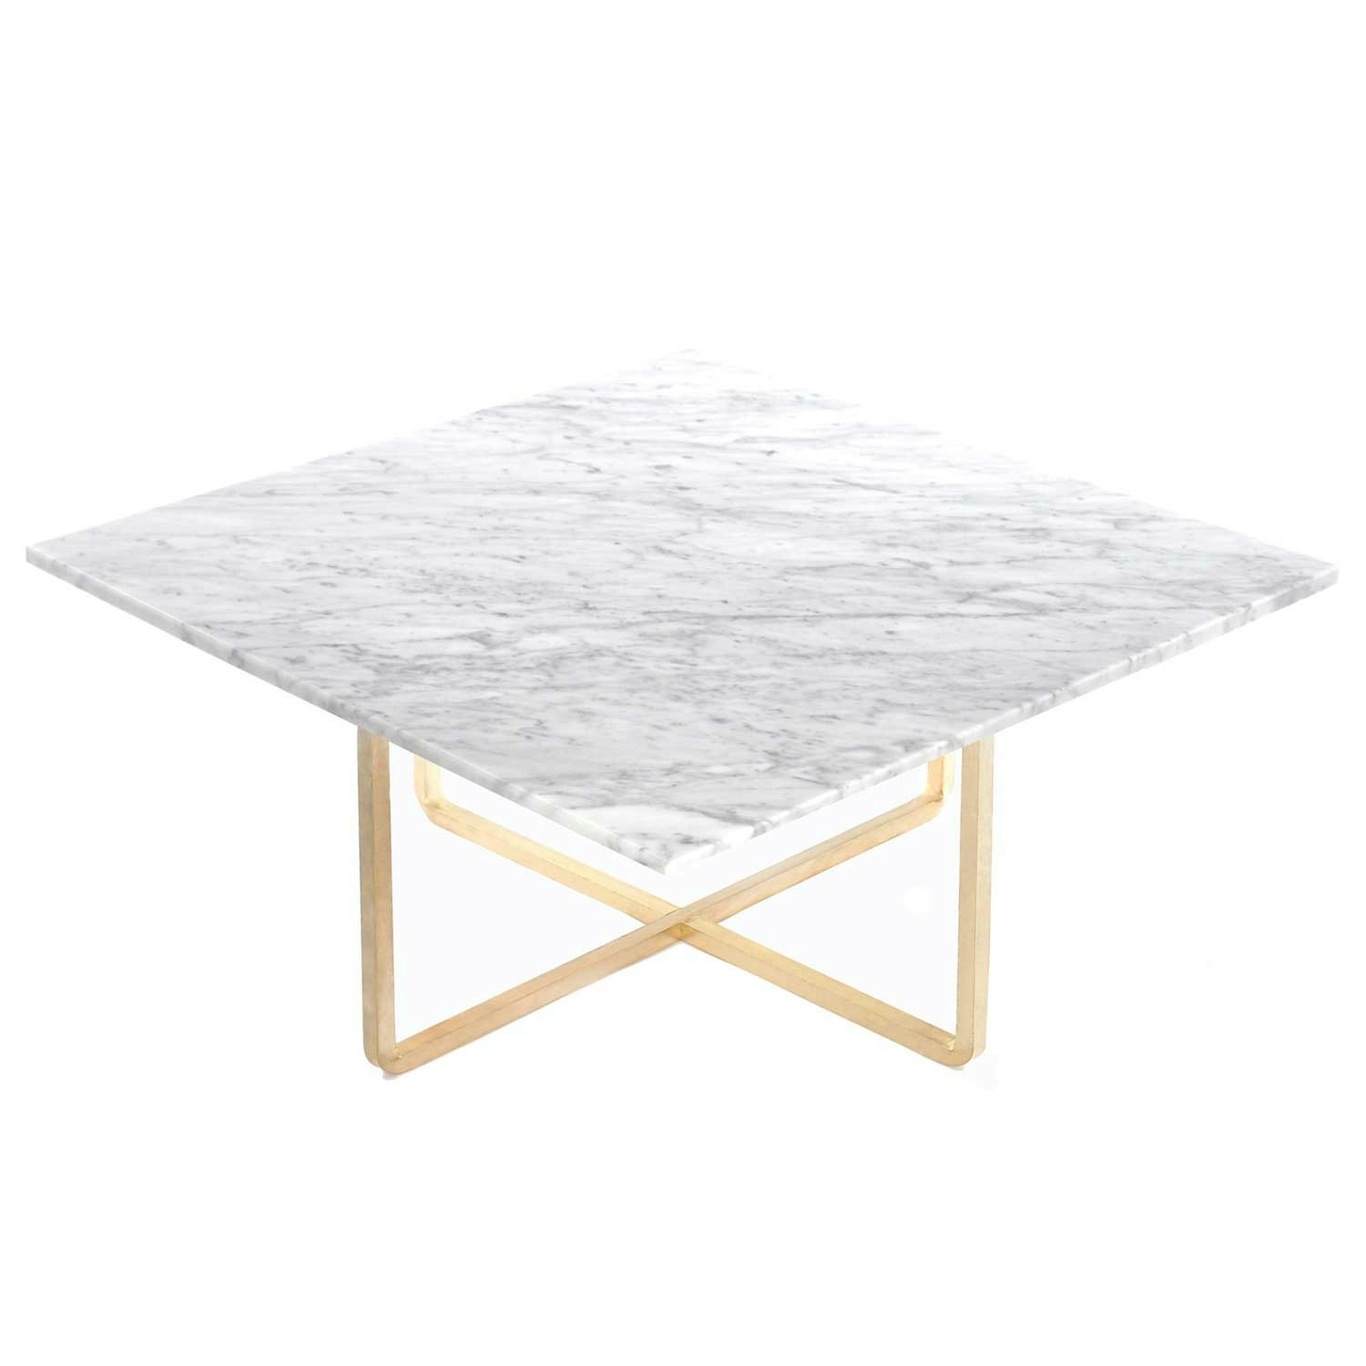 Ninety Coffee Table 80 cm, Brass Base, White Marble